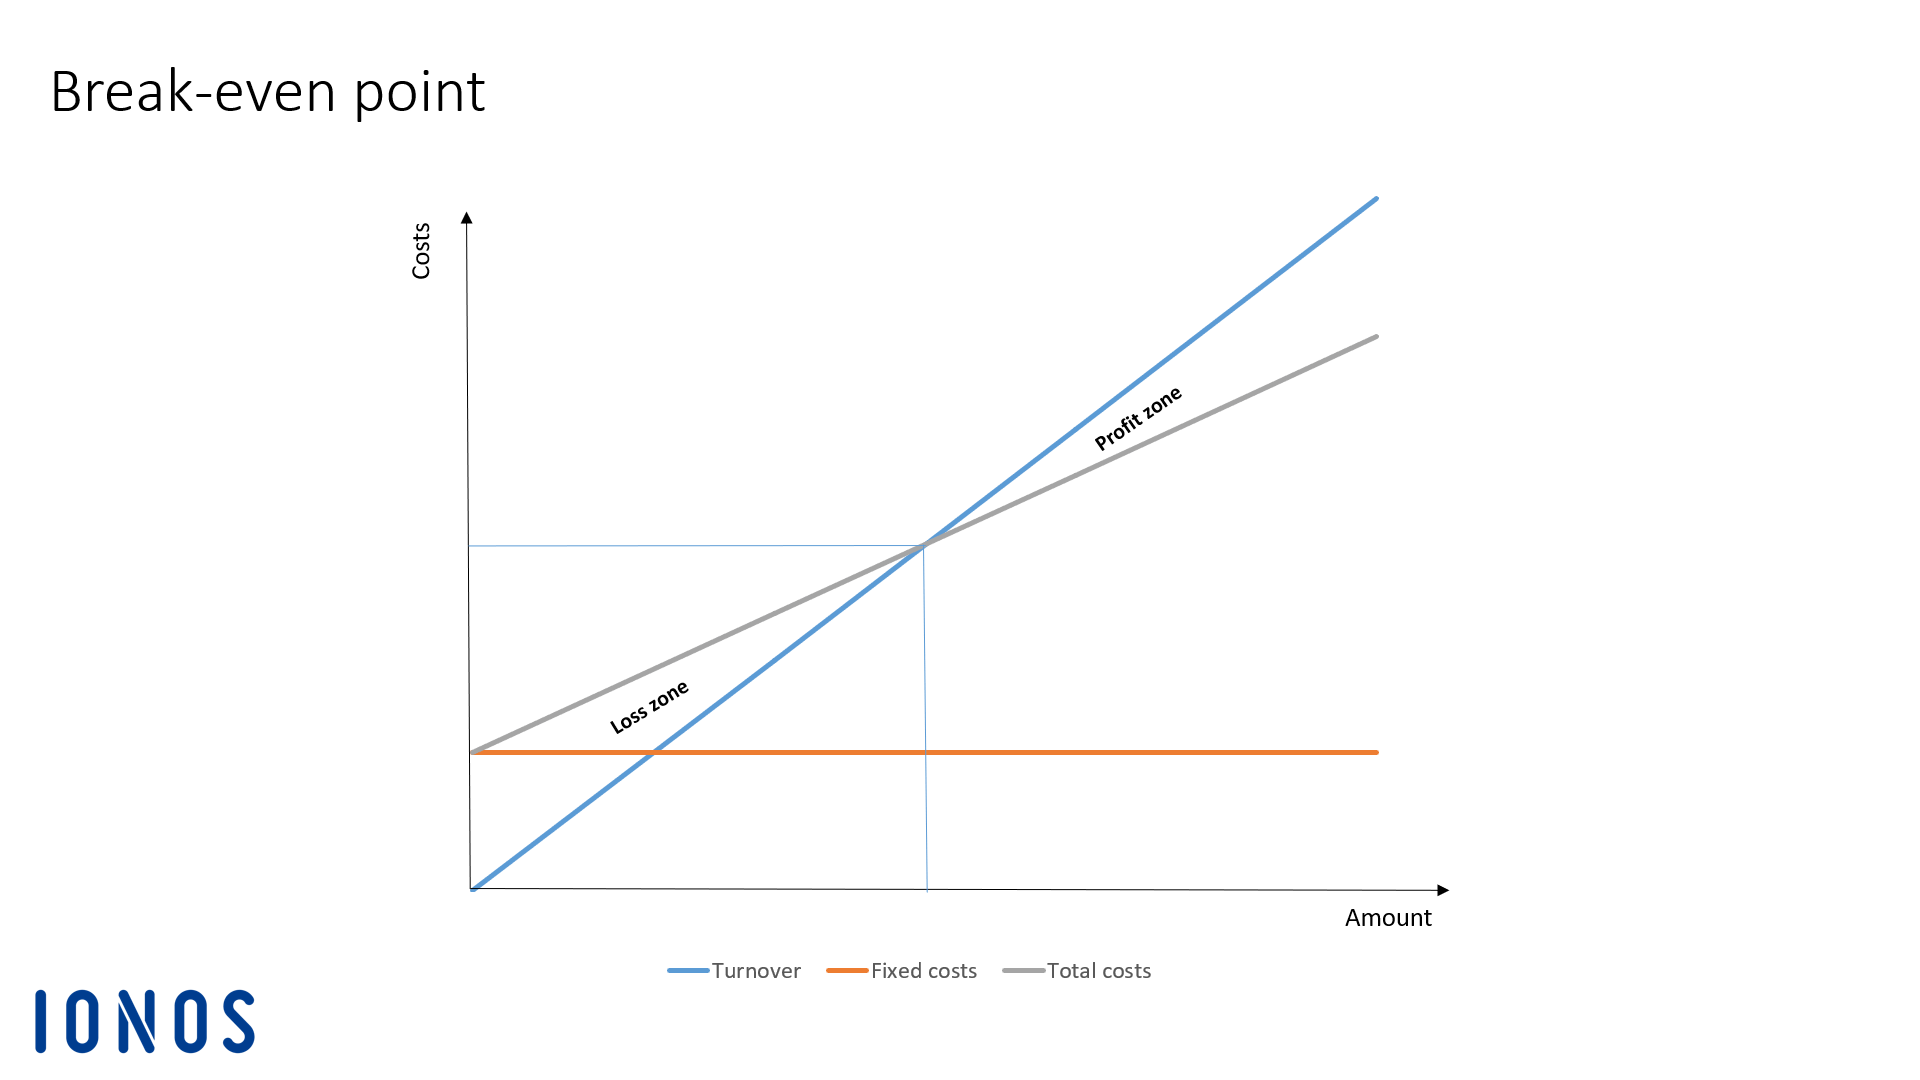 Graph showing the break-even point (i.e. the point where the revenue and total cost curves intersect)